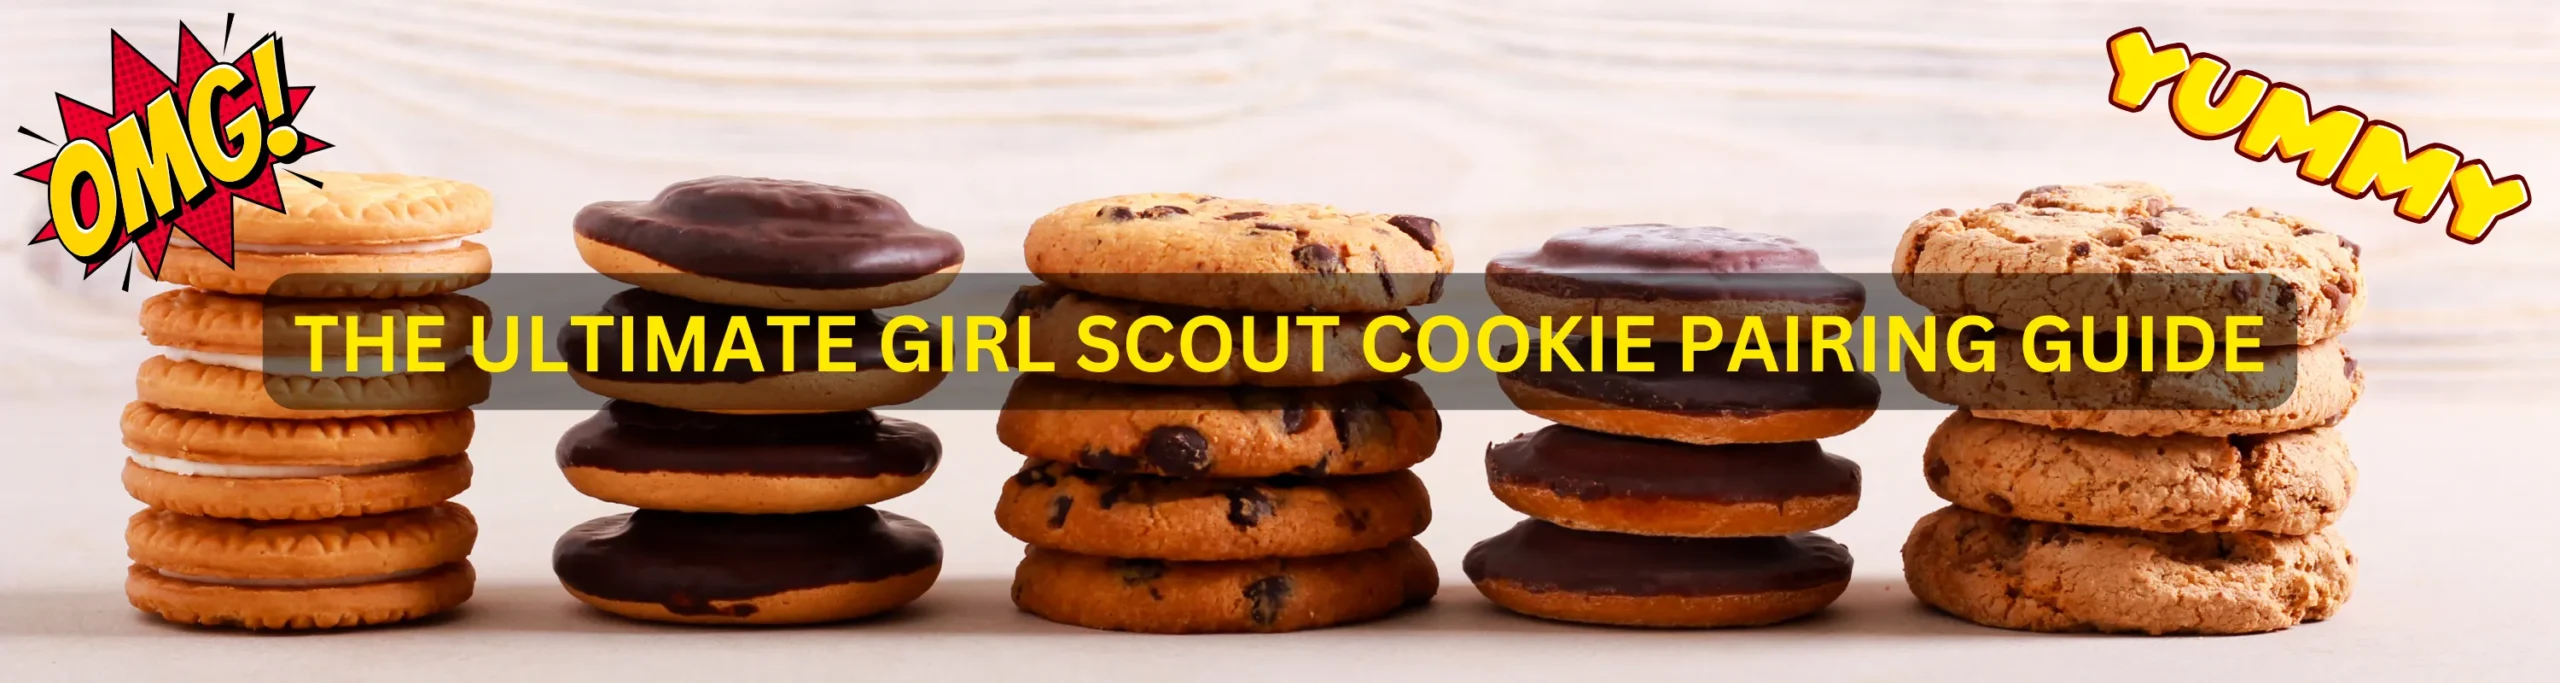 THE ULTIMATE GIRL SCOUT COOKIE PAIRING GUIDE